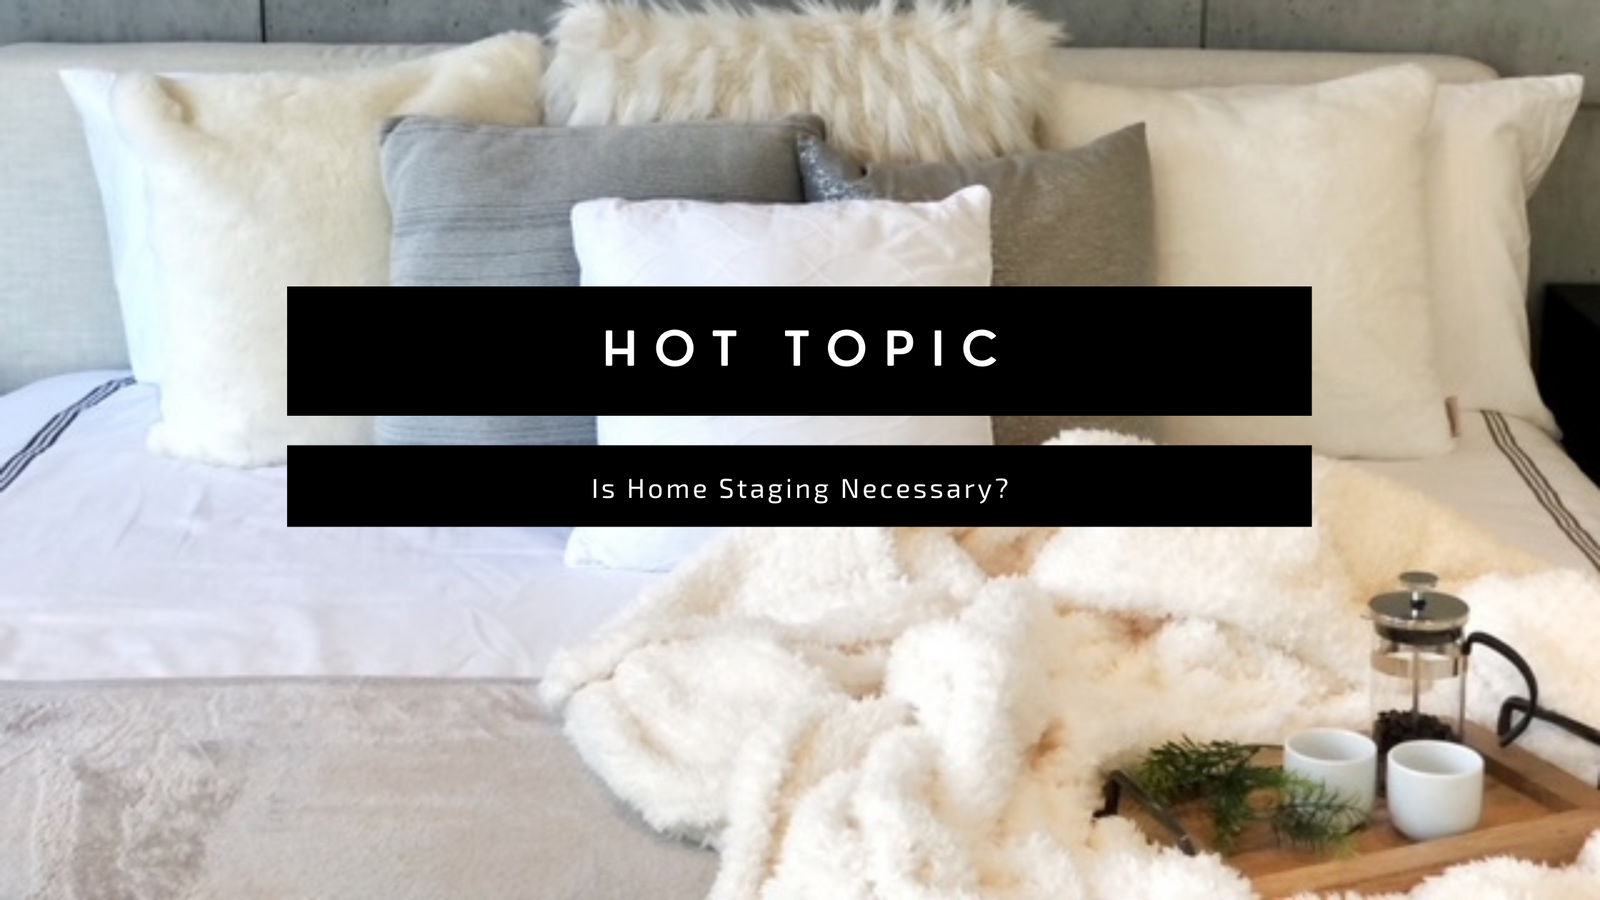 Hot Topic: Is Home Staging Necessary?